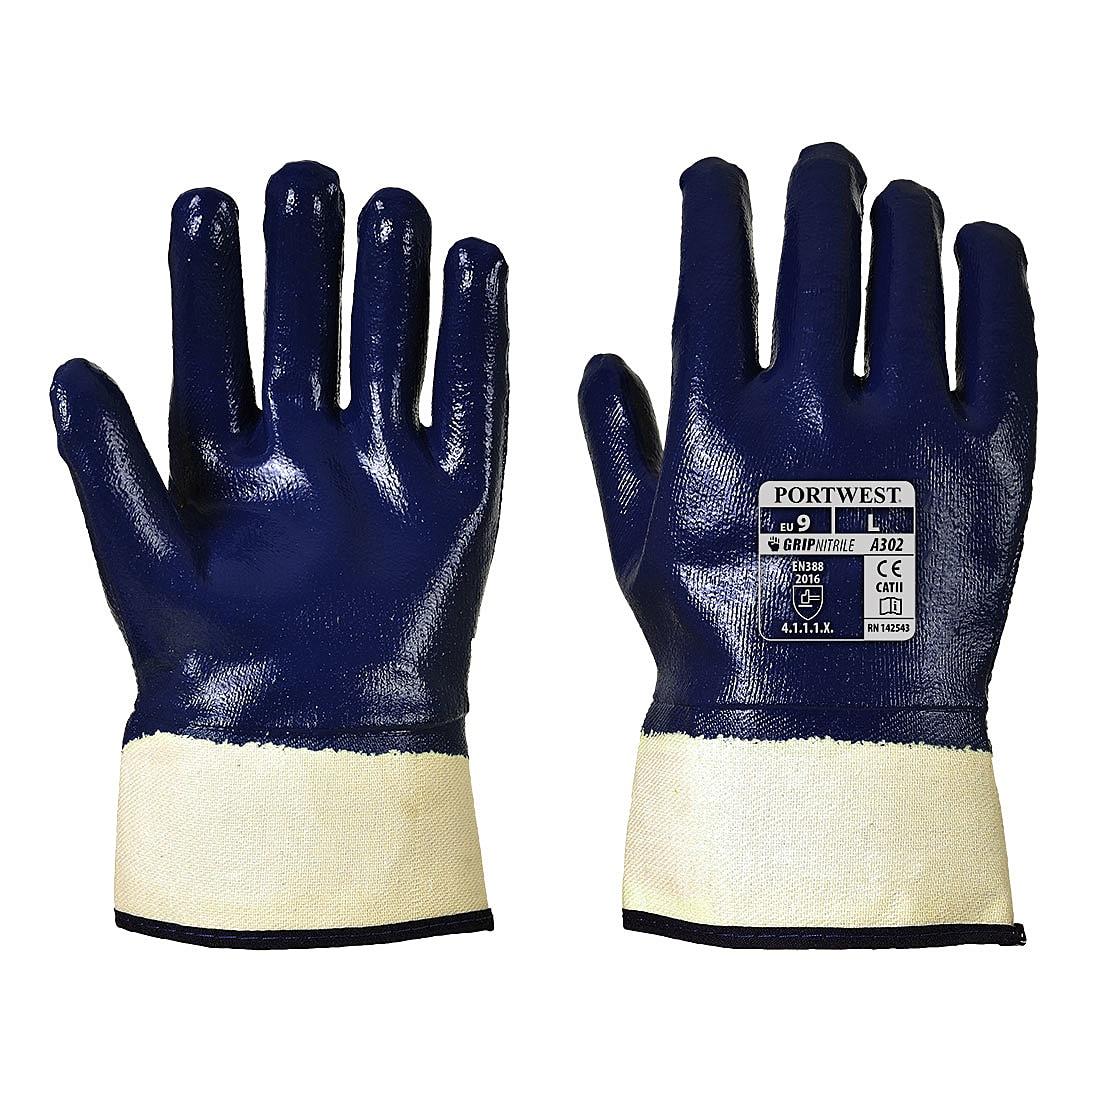 Portwest Fully Dipped Nitrile Safety Cuff Gloves in Navy (Product Code: A302)